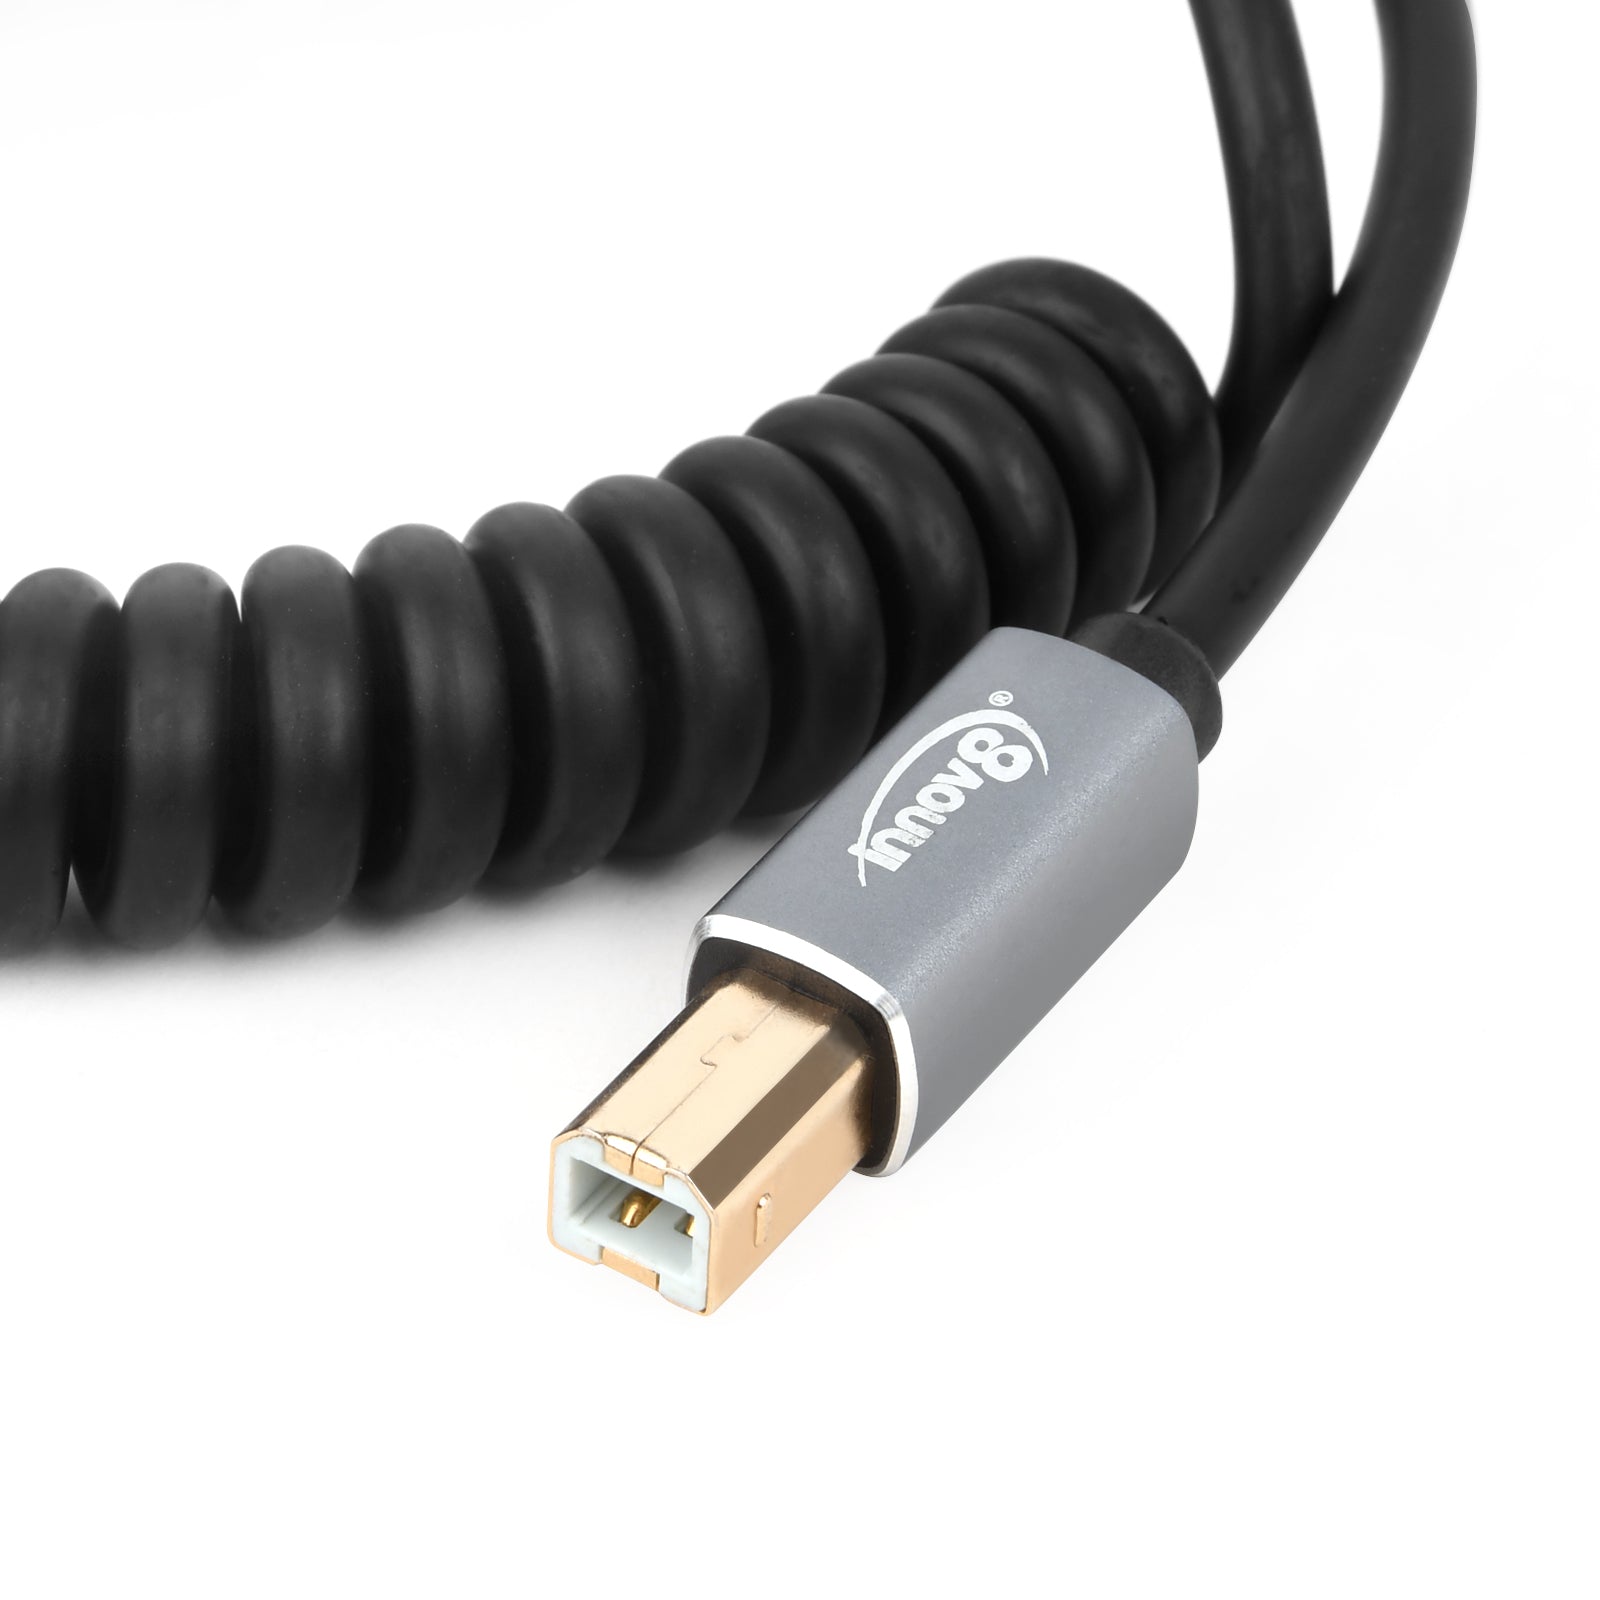 USB-A 2.0 Male to USB-B Male Coiled Printer Cable 1.8m